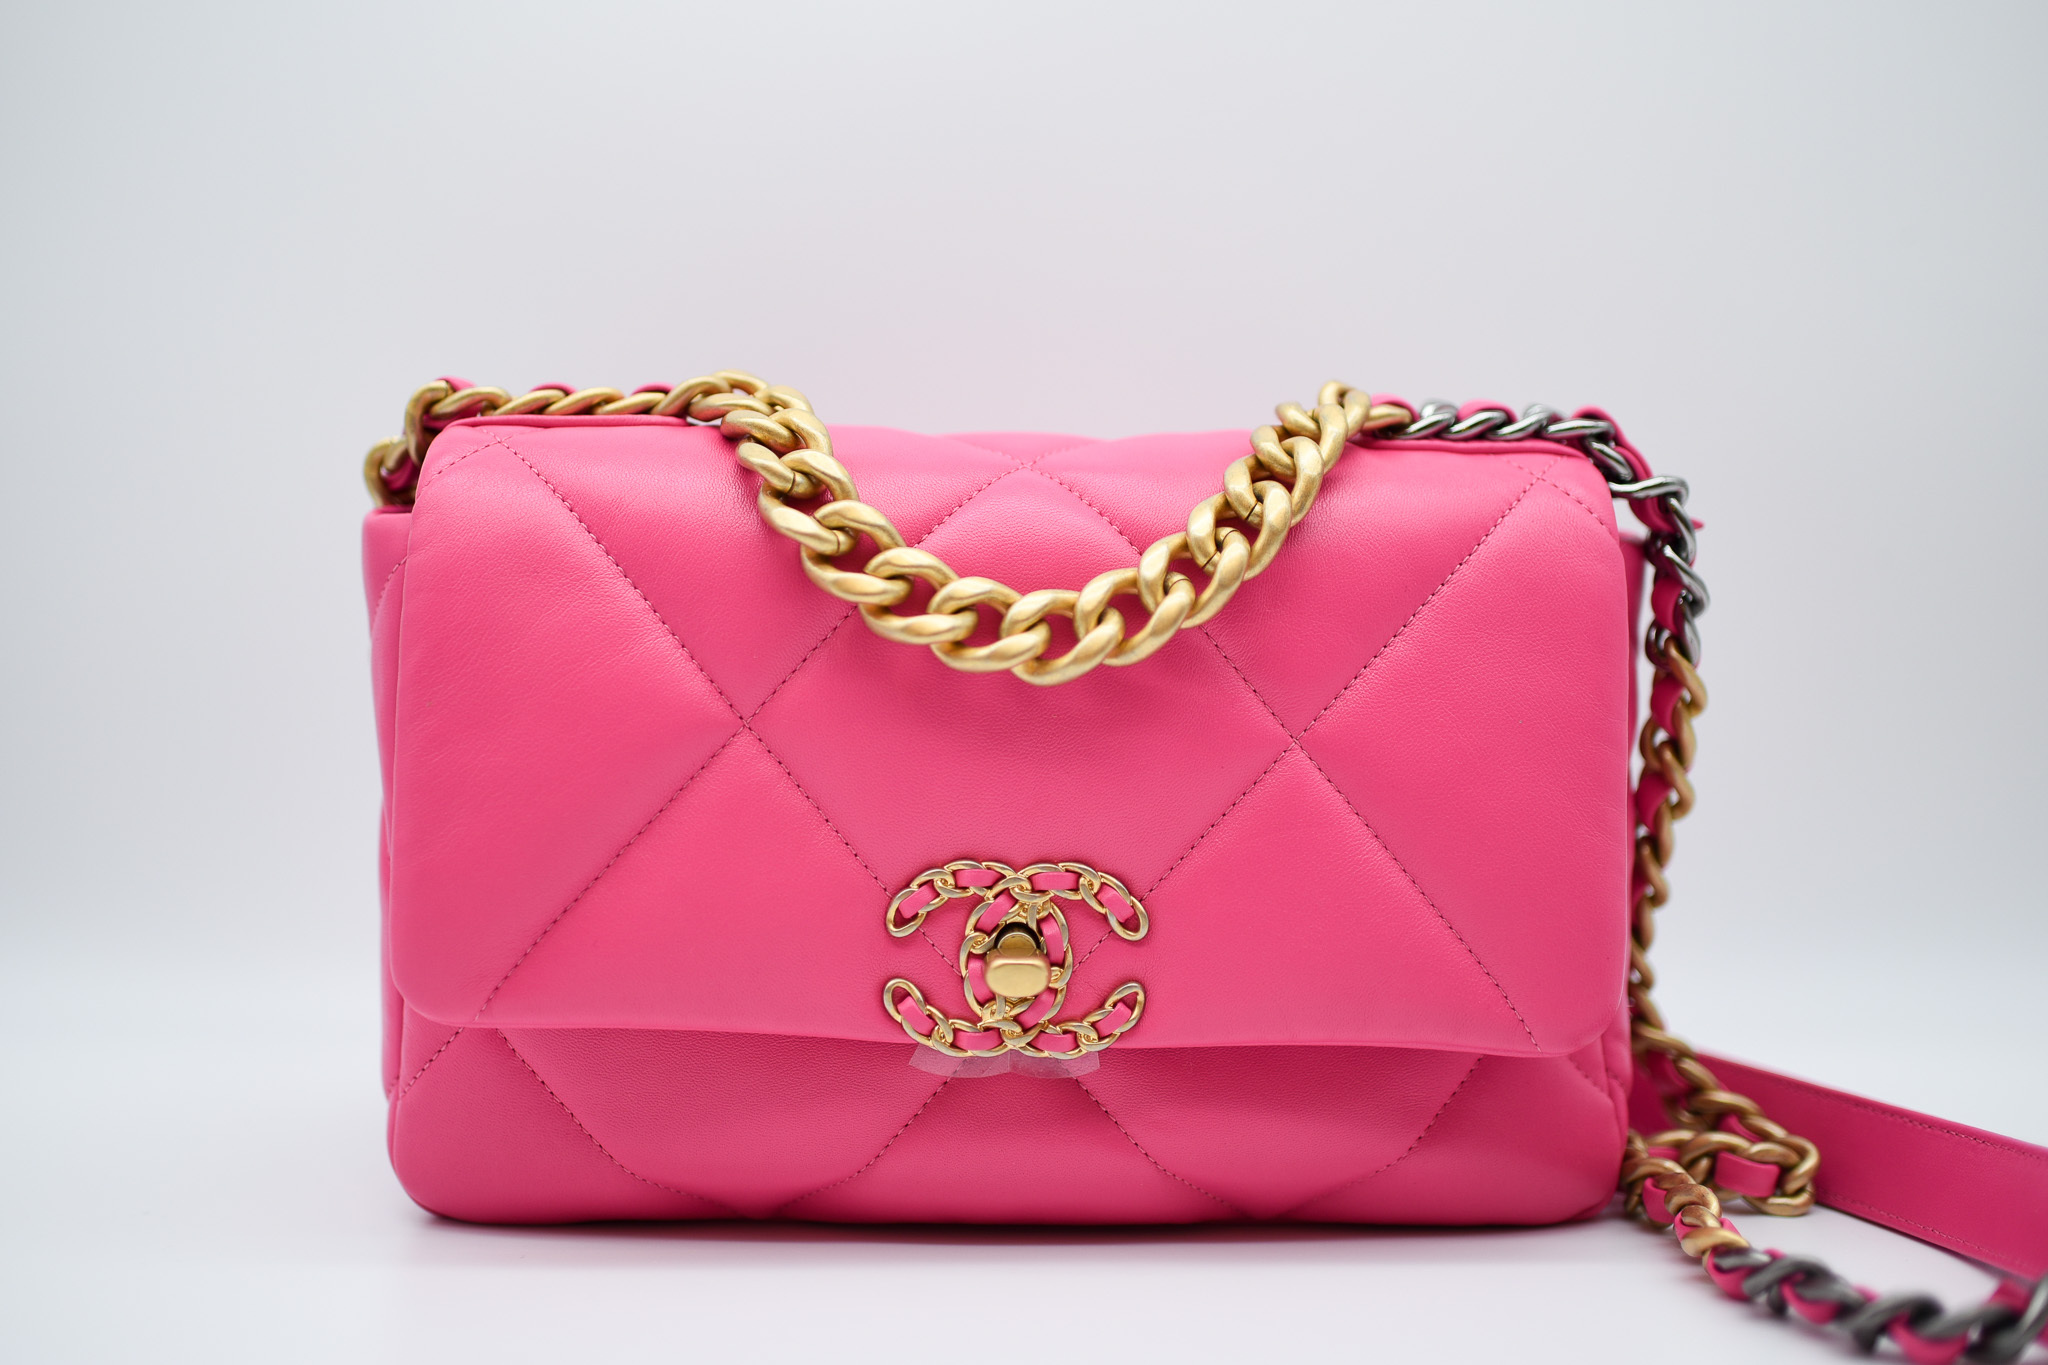 CHANEL WOC Pink Bags & Handbags for Women for sale